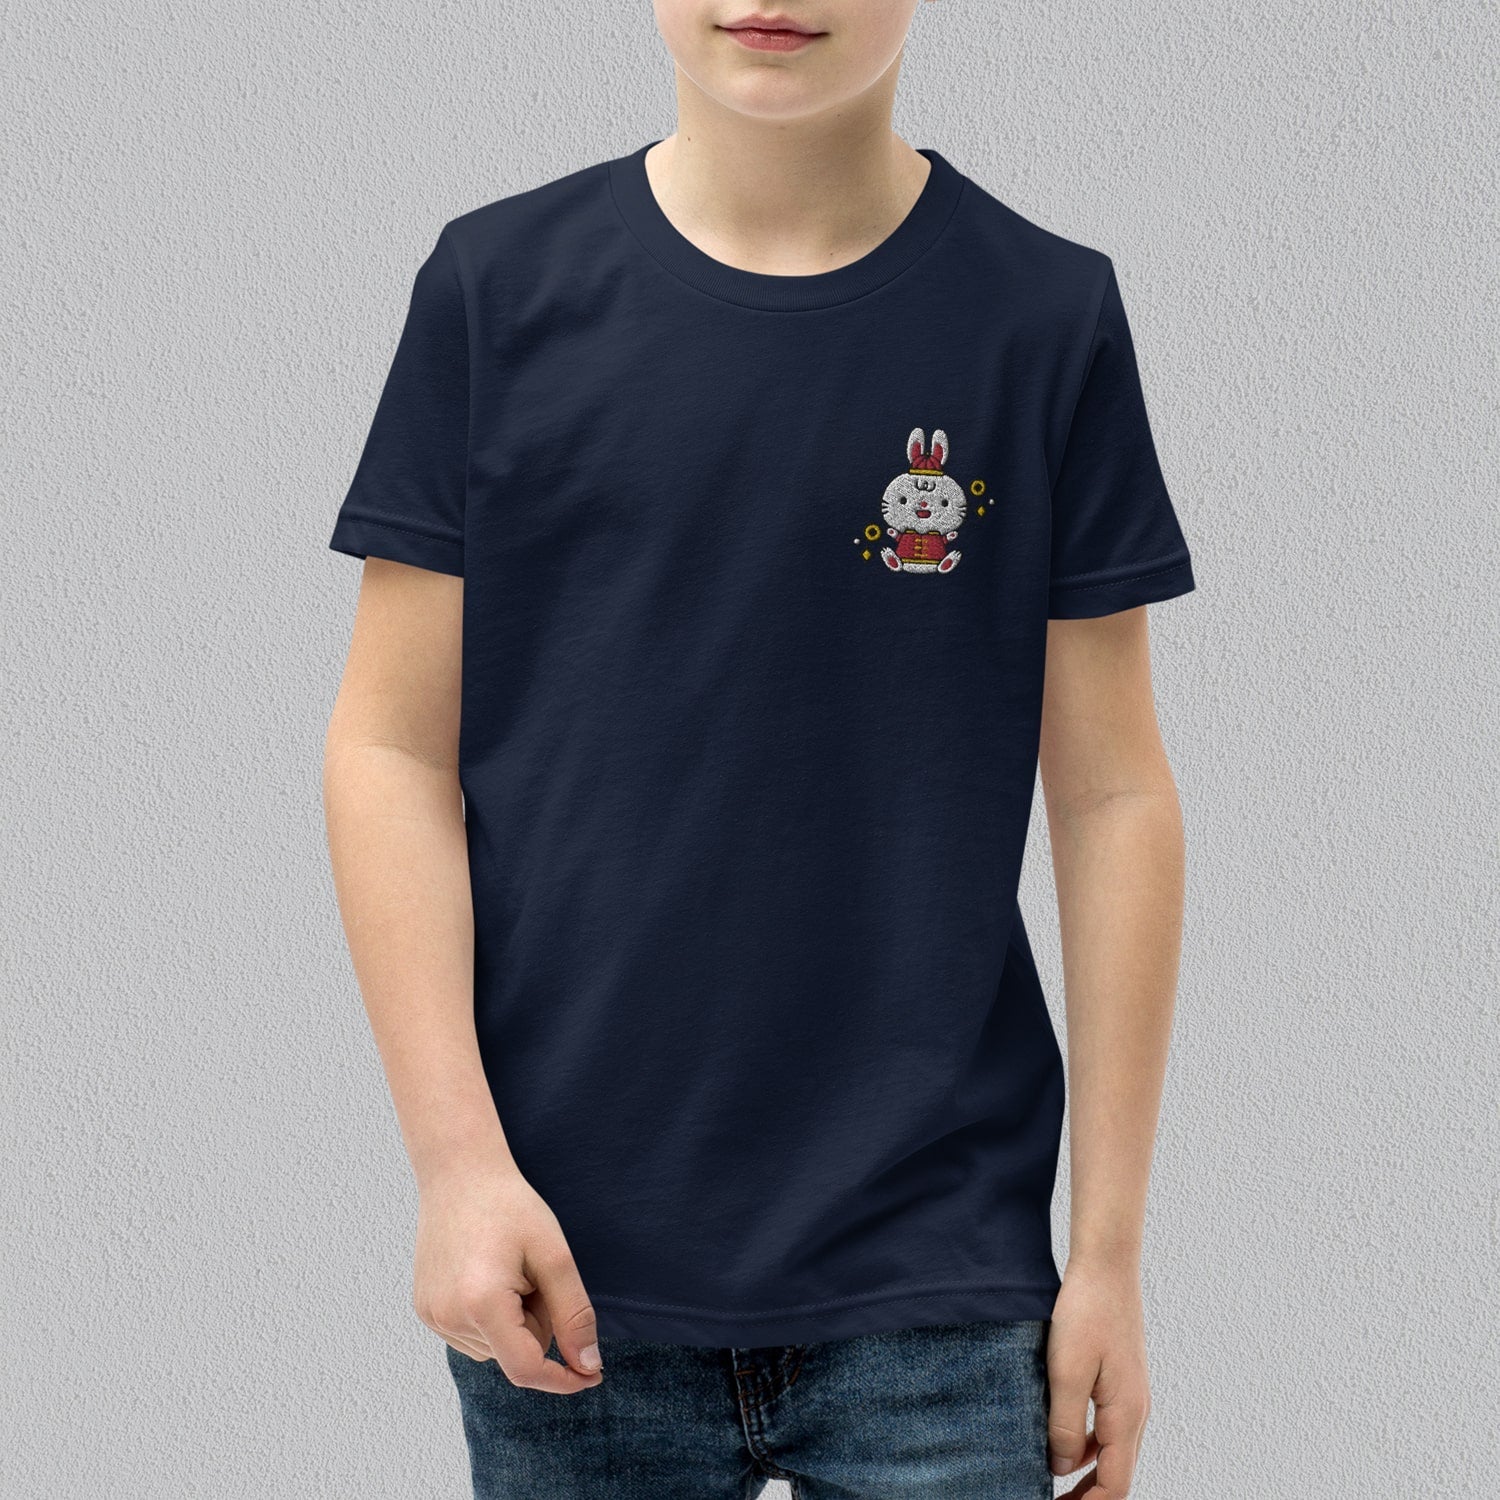 Year of the Rabbit Embroidered Kids T-Shirt - Ni De Mama Chinese Clothing